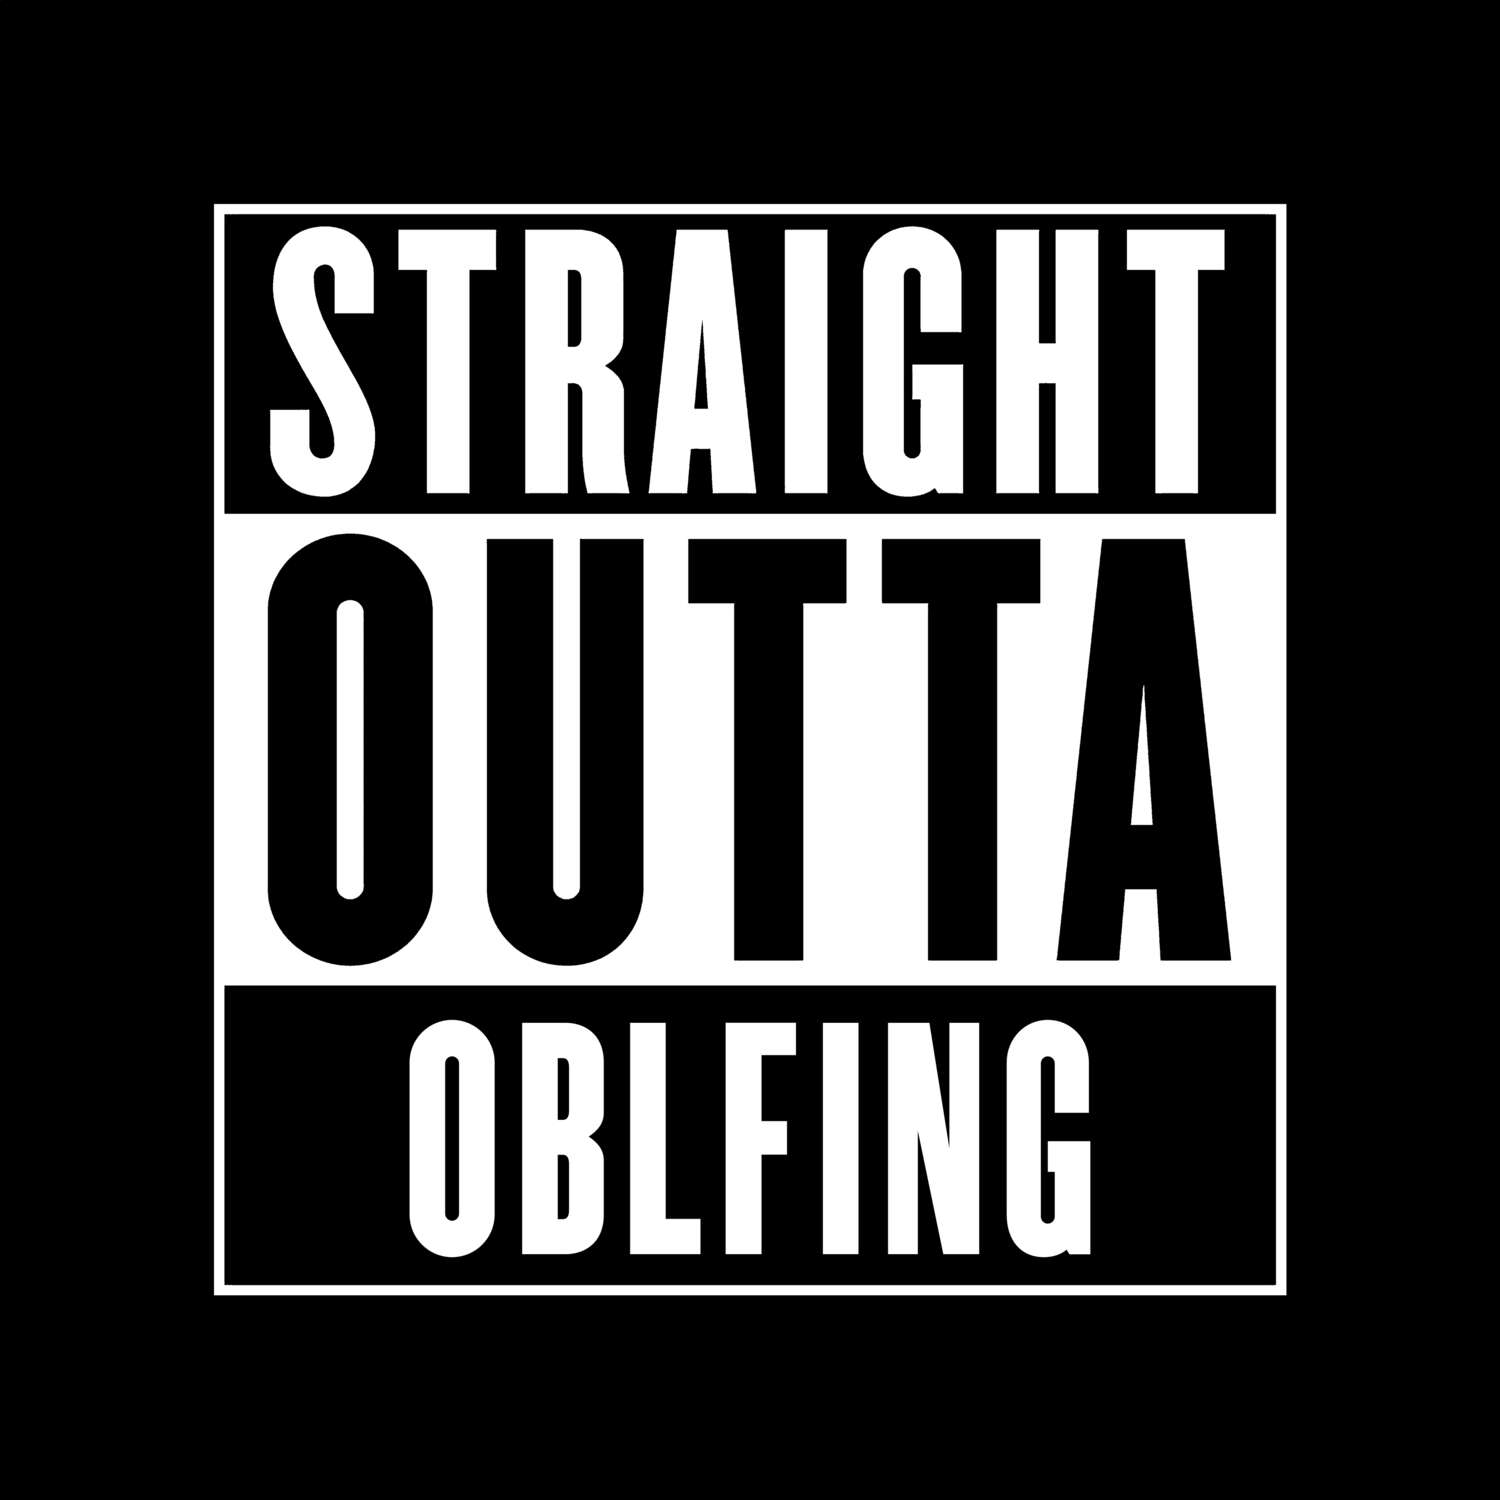 Oblfing T-Shirt »Straight Outta«